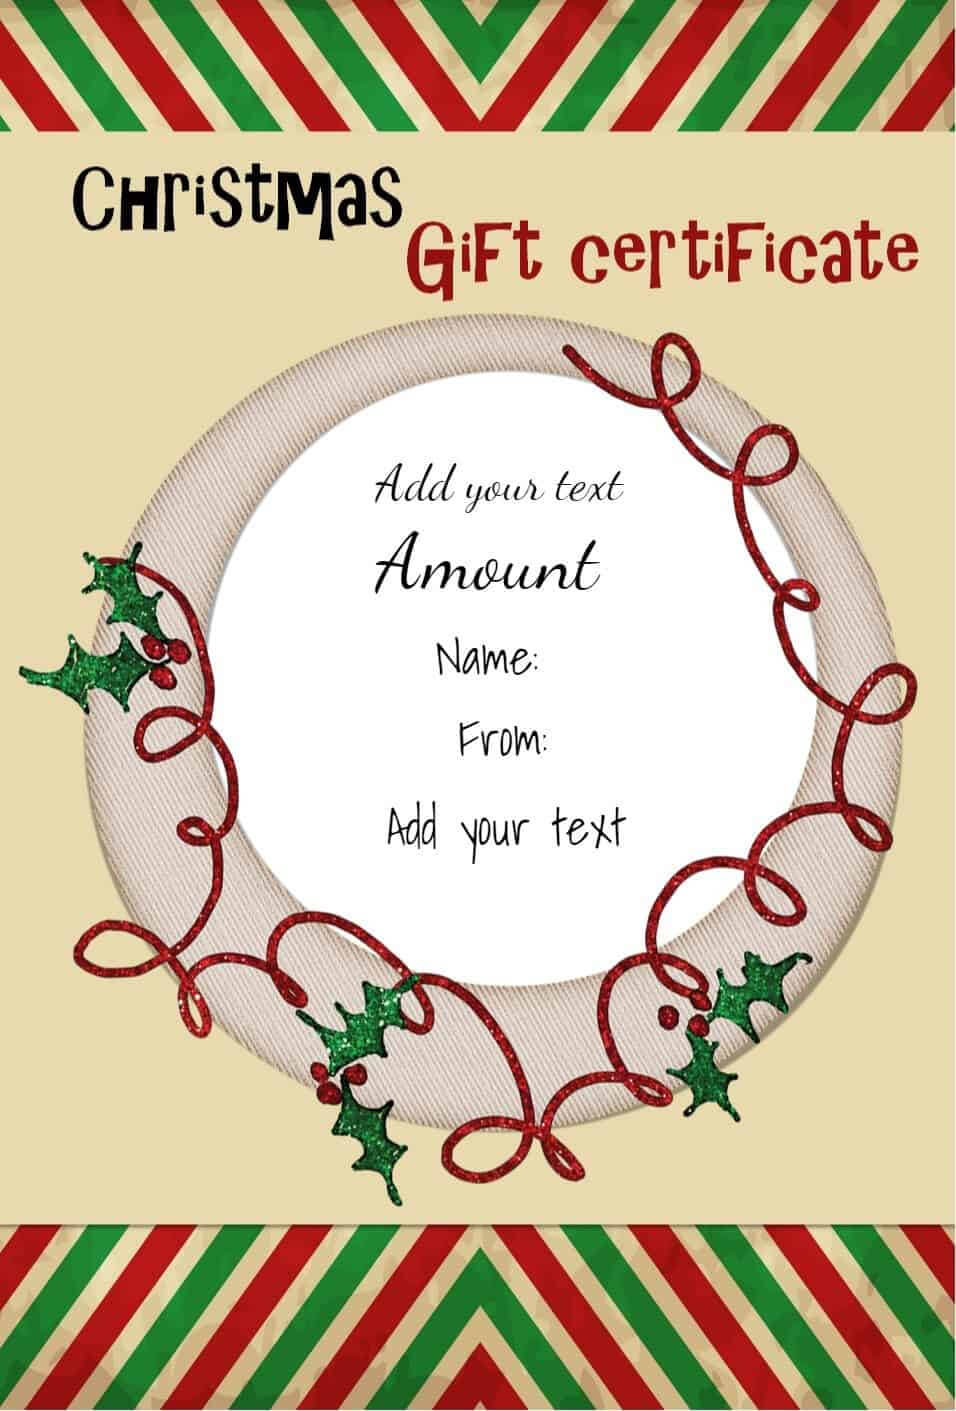 Free Christmas Gift Certificate Template | Customize Online Regarding Christmas Gift Certificate Template Free Download